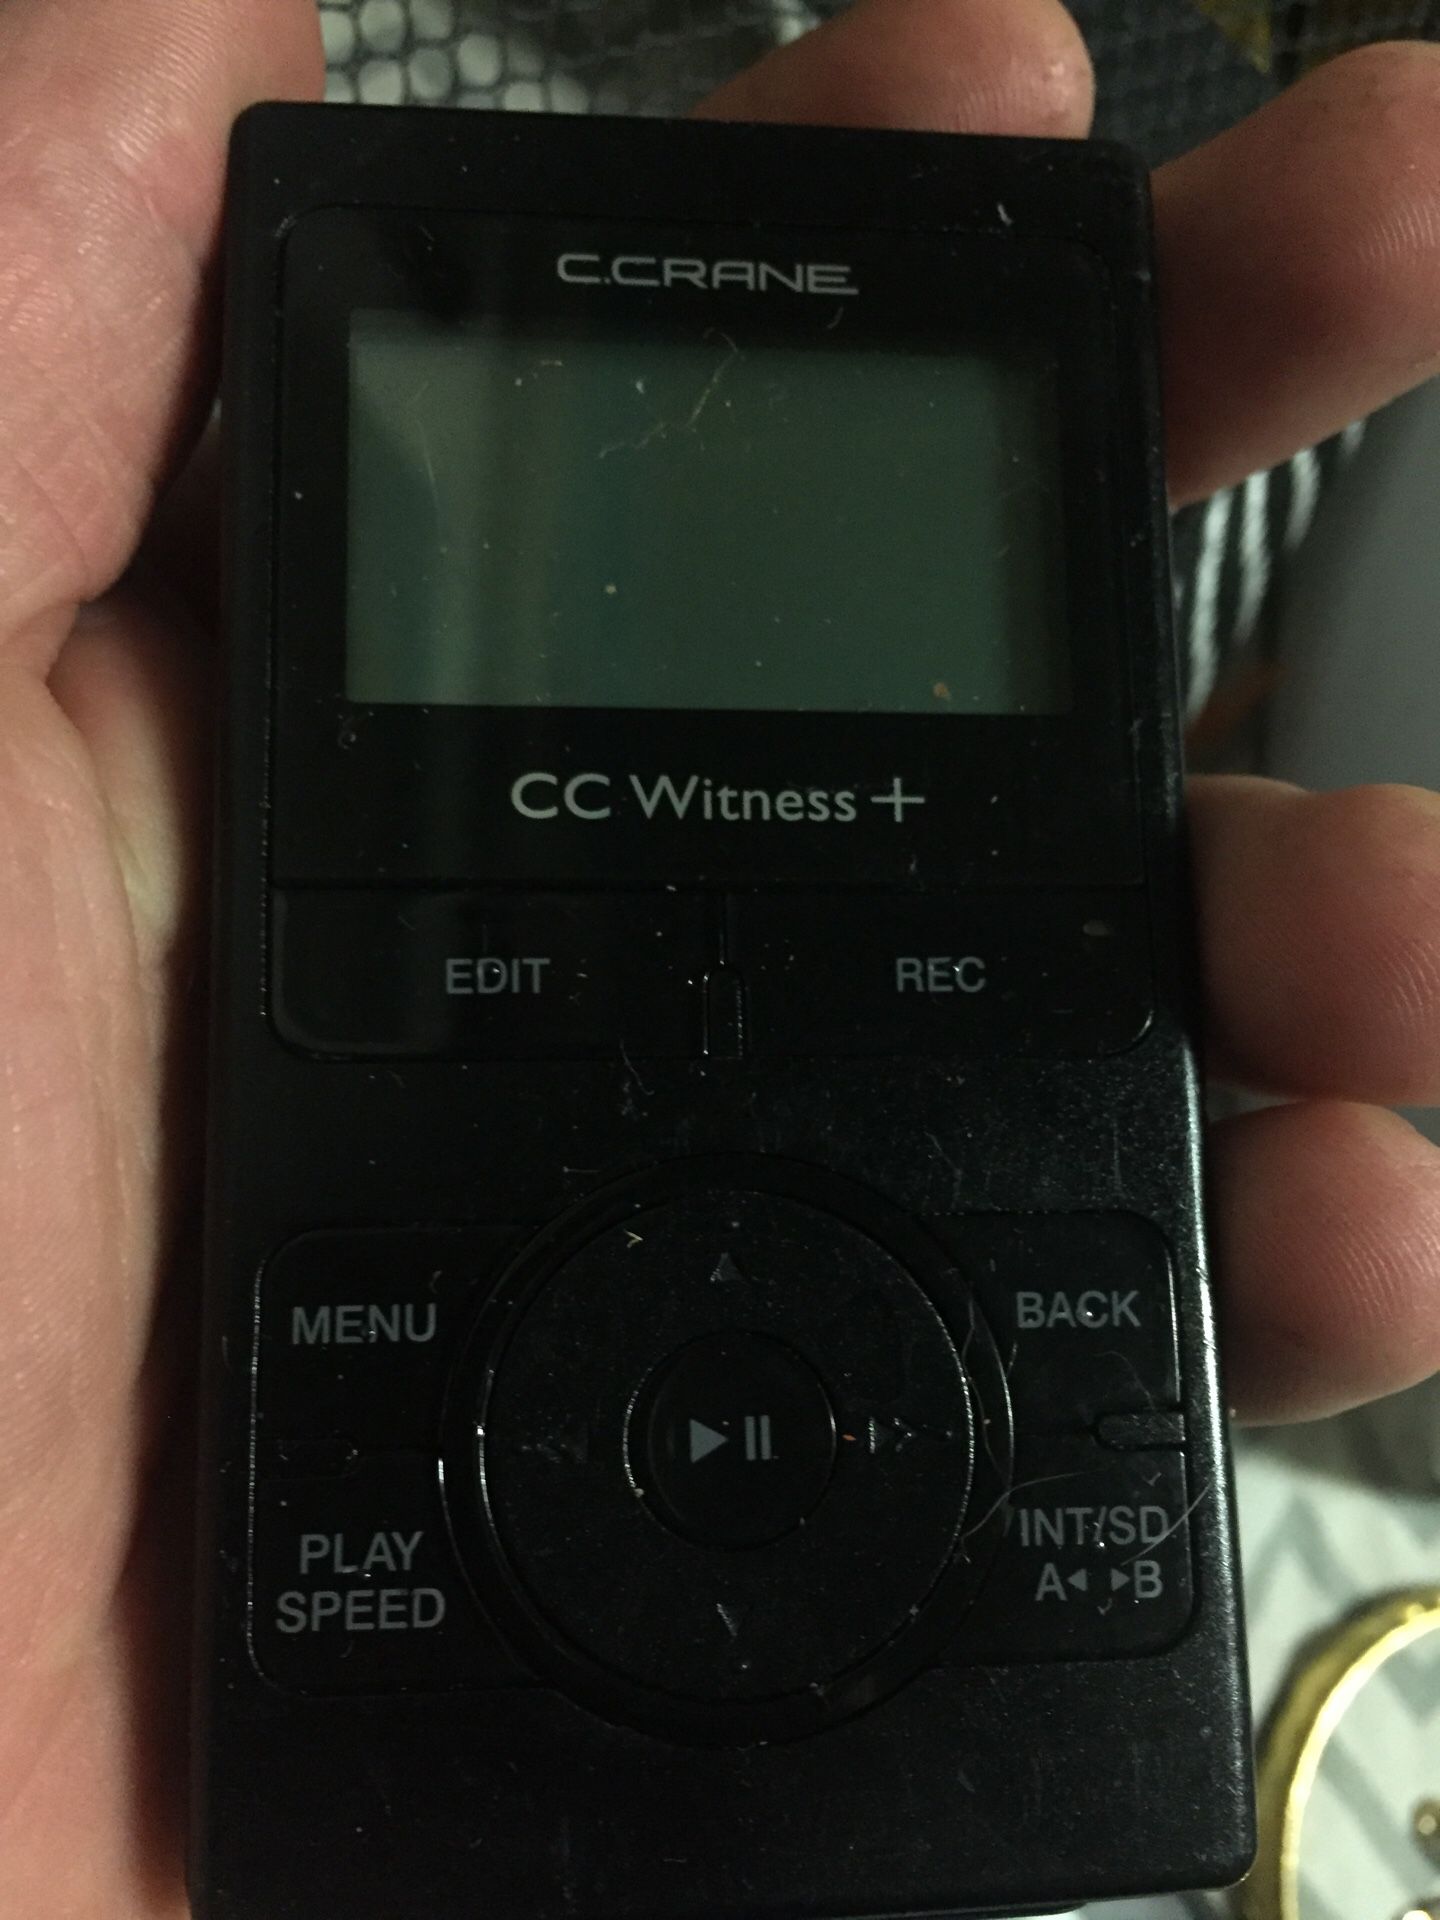 Undercover tape recorder for cc witness